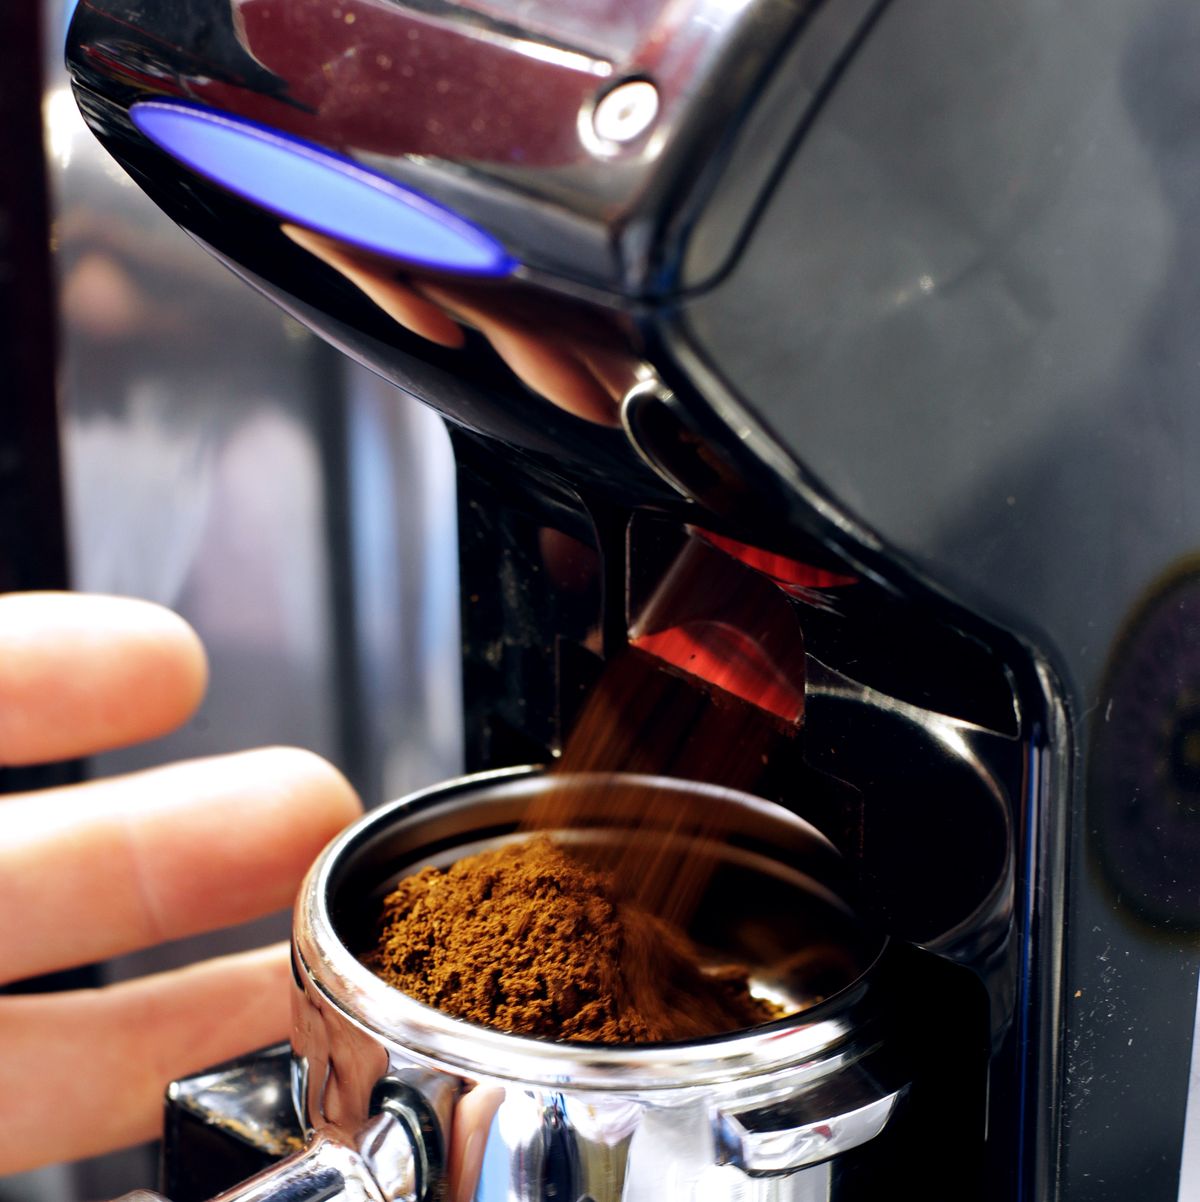 How to Properly Grind Coffee Beans, According to Experts